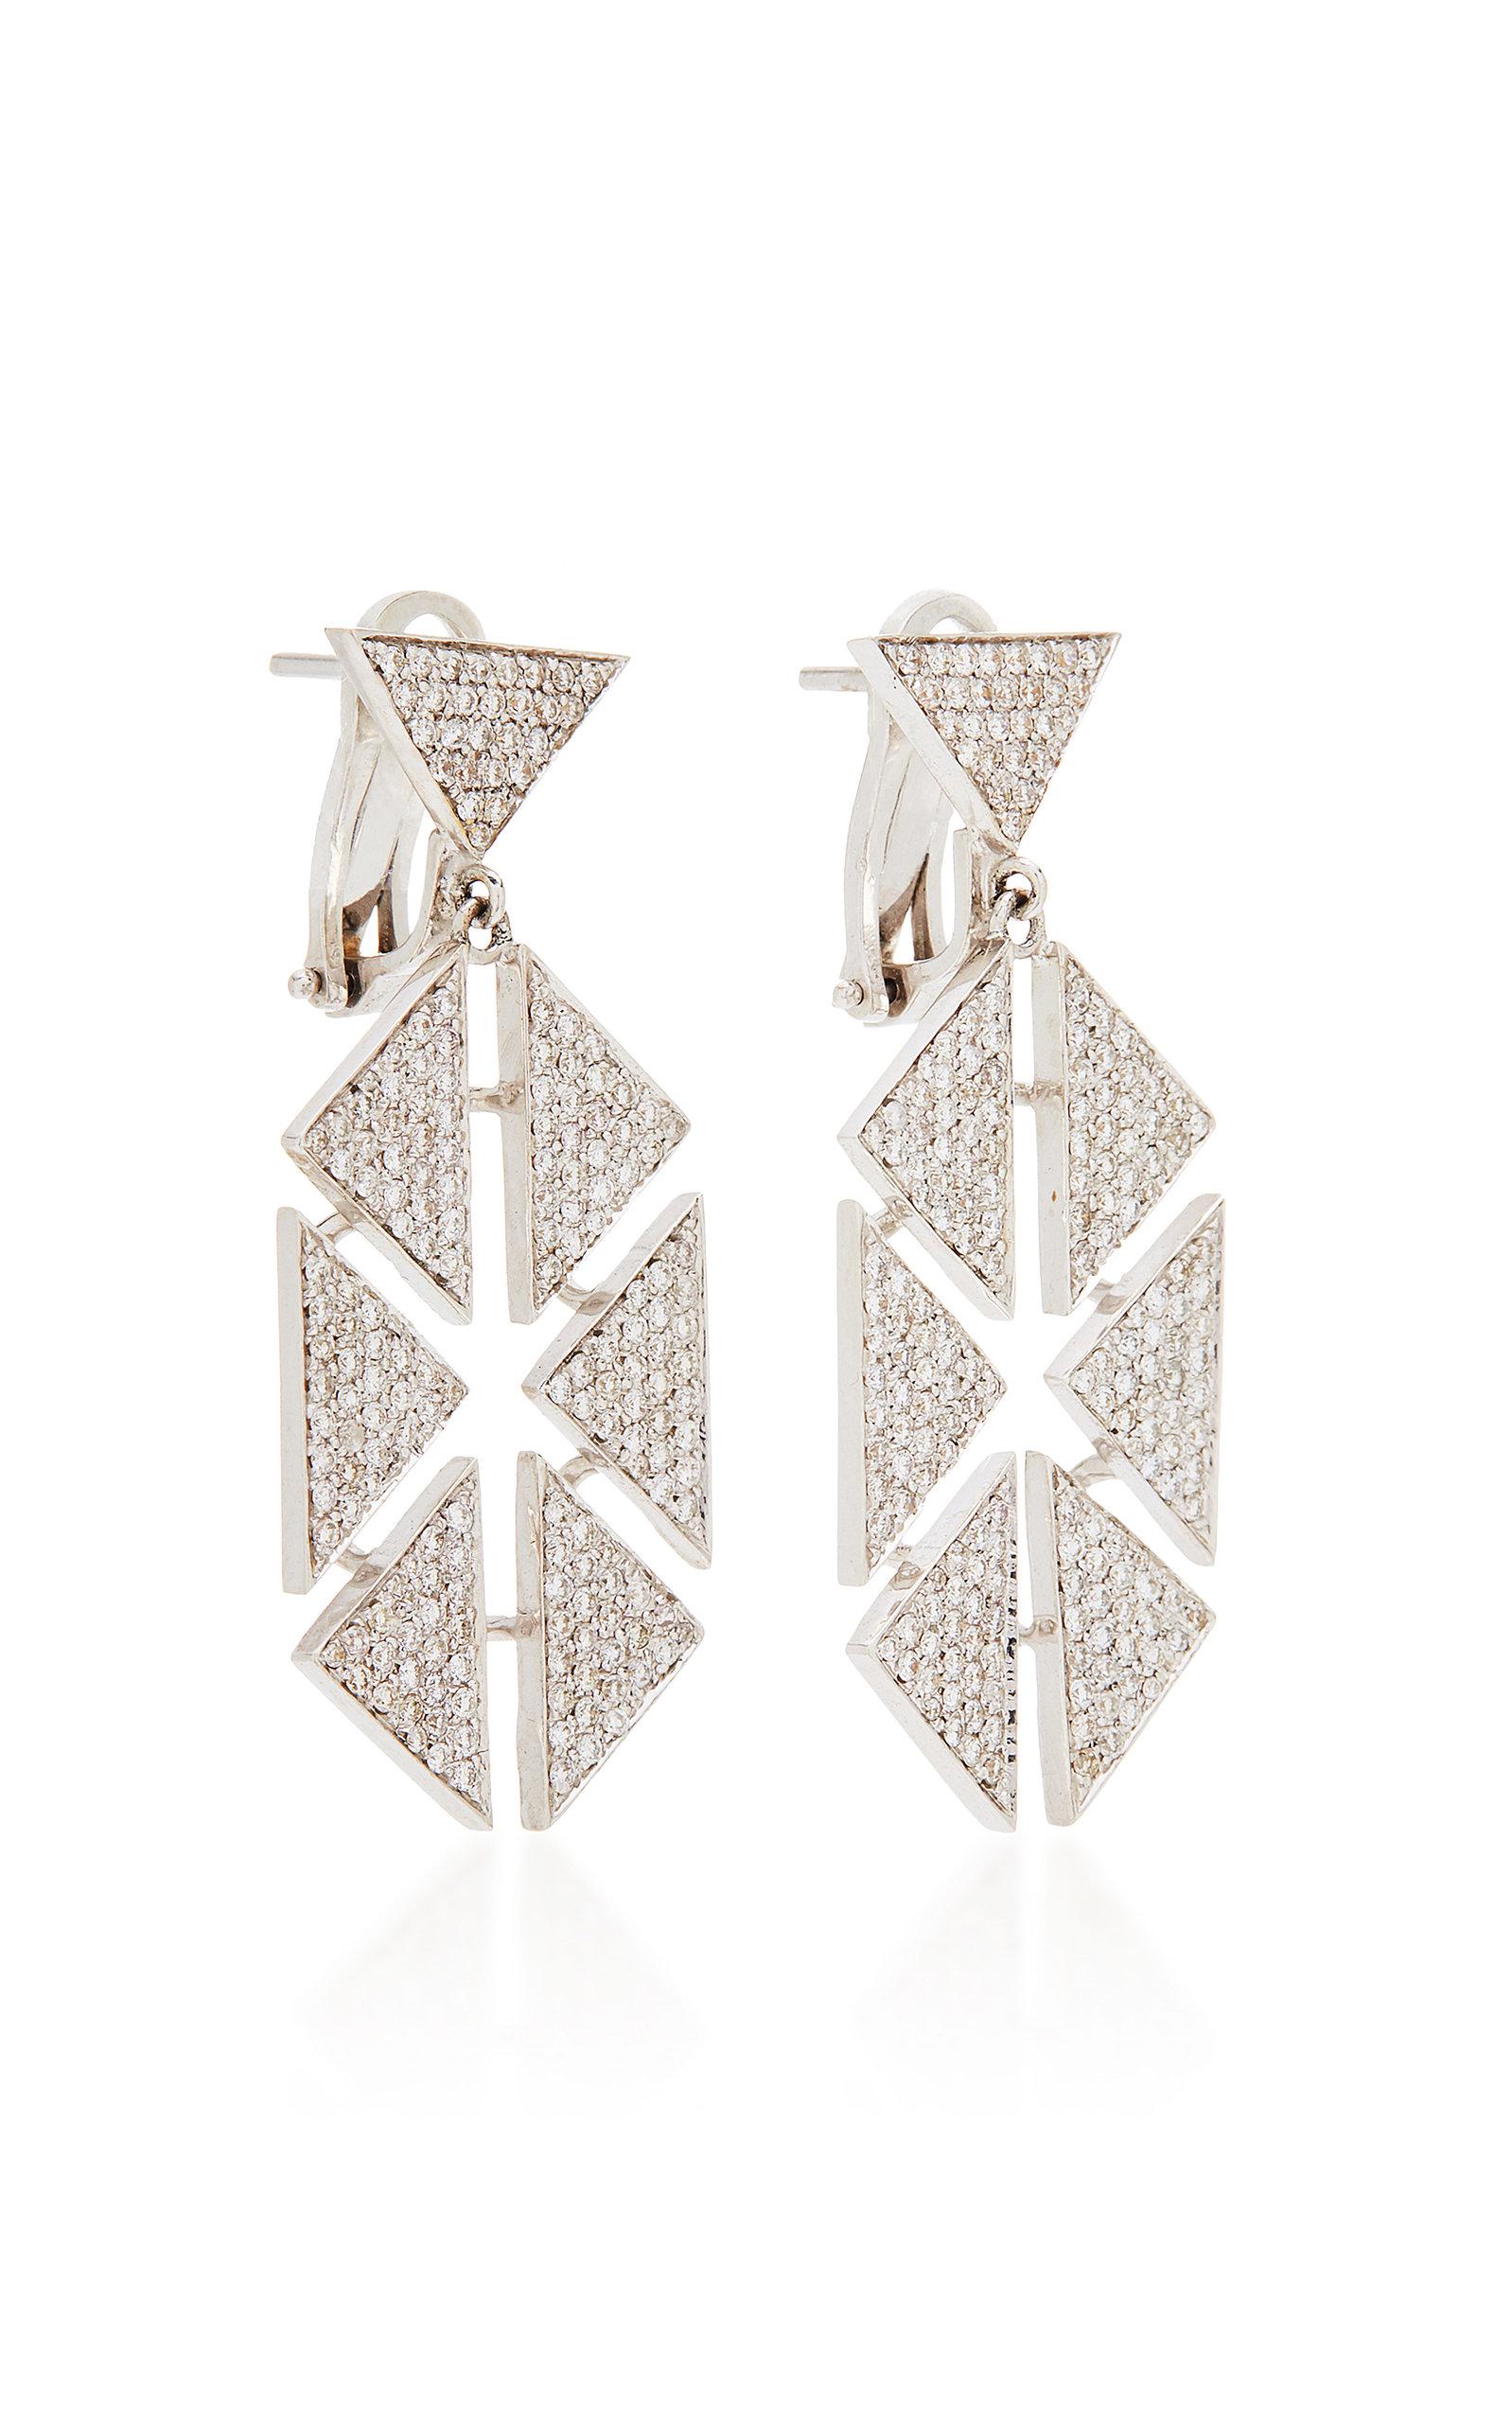 18 Karat White Gold Diamond Floating Triangle Geometric Earrings feature one white diamond pave triangle stud with a drop of 6 pave diamond triangles facing inward with negative space in between each and set in 18k White Gold 
Includes 18k White